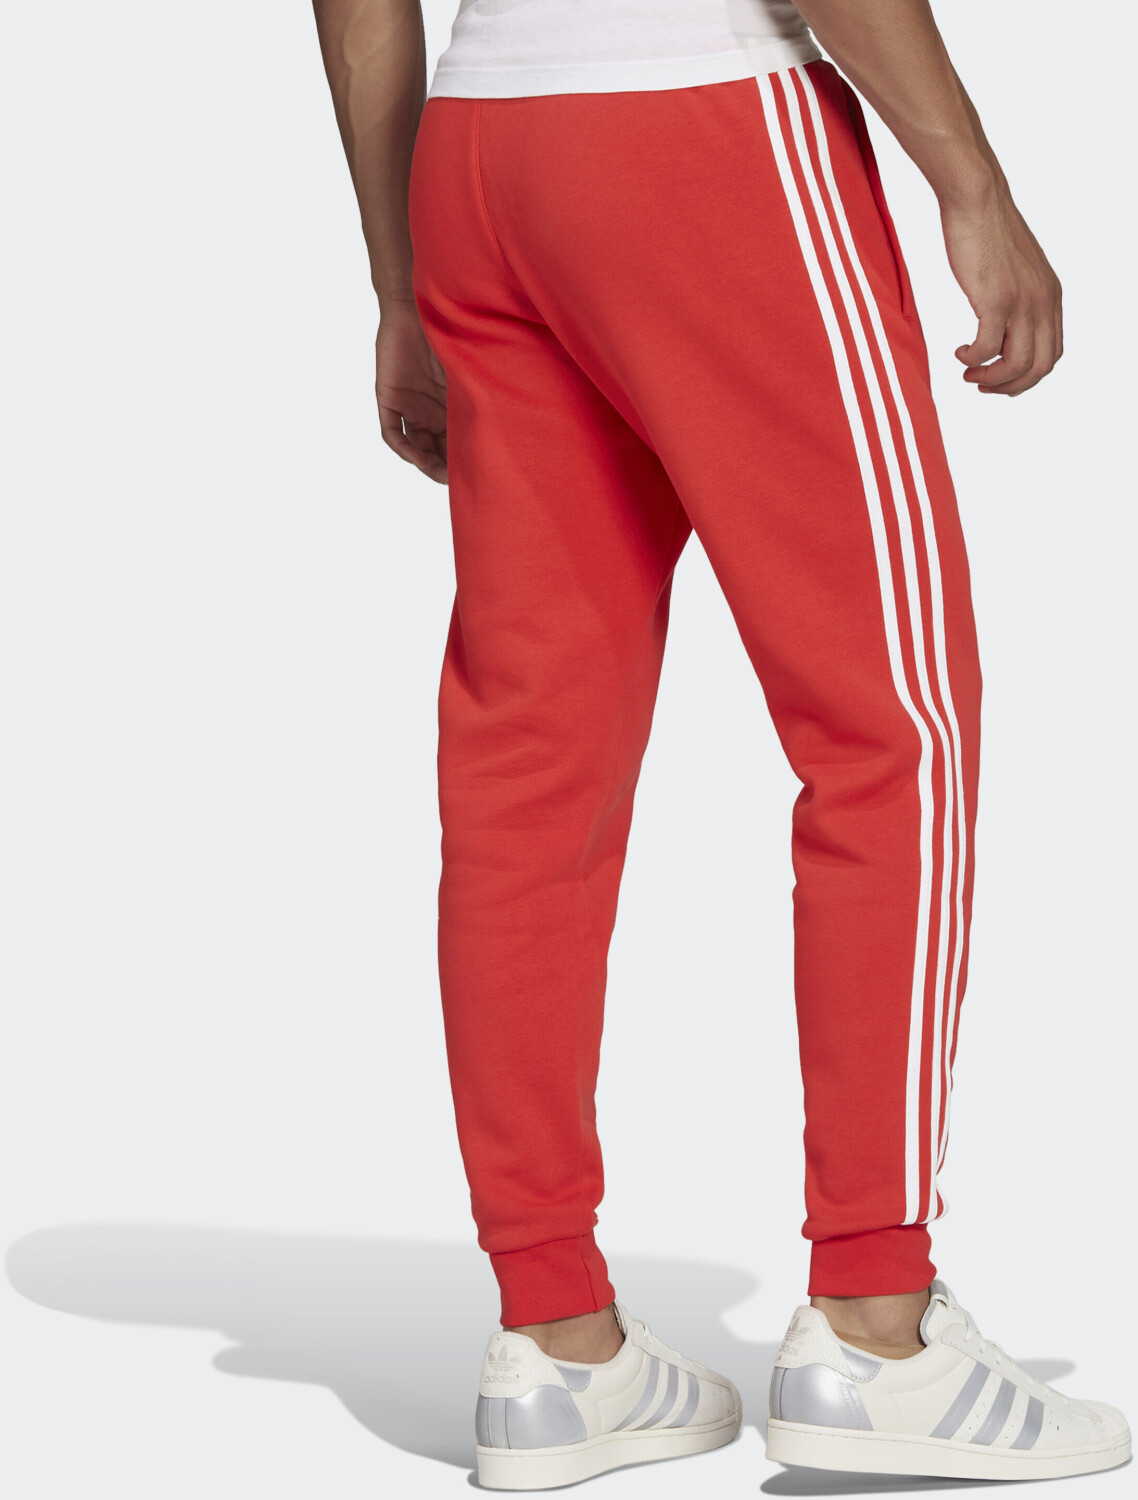 Buy Adidas Adicolor Classics 3-Stripes Pants vivid red (HF2100) from £61.73  (Today) – Best Deals on